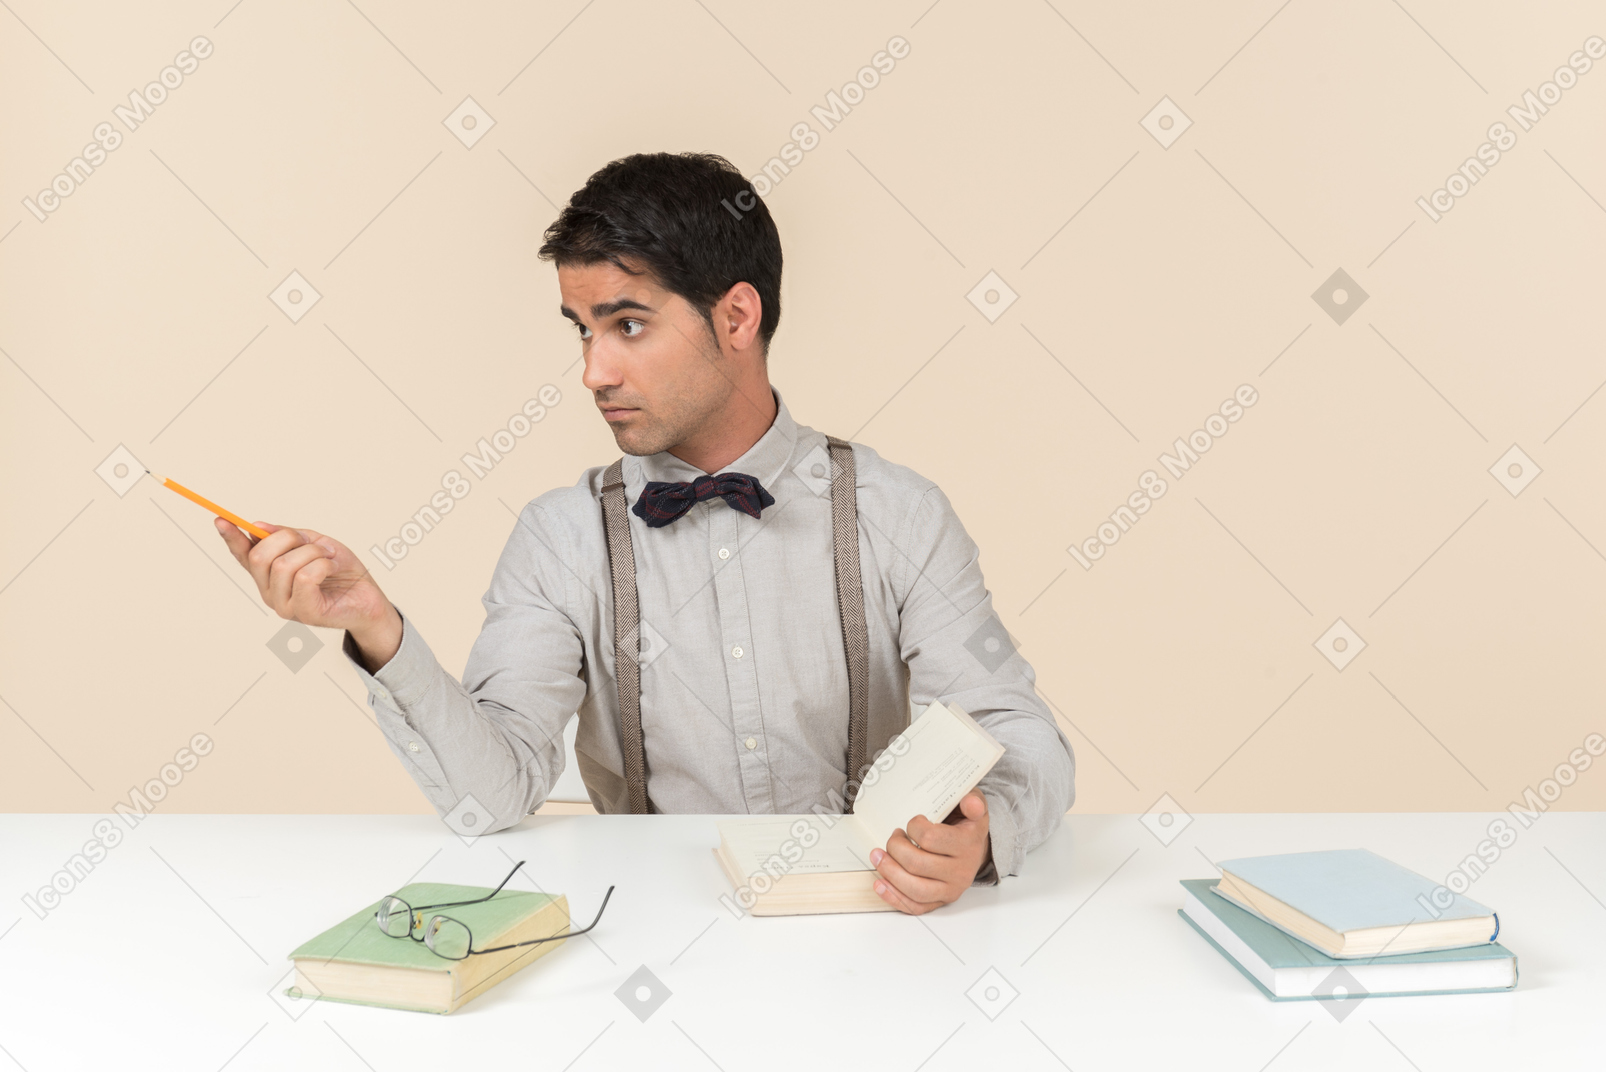 Adult student sitting at the table and pointing aside with a pen